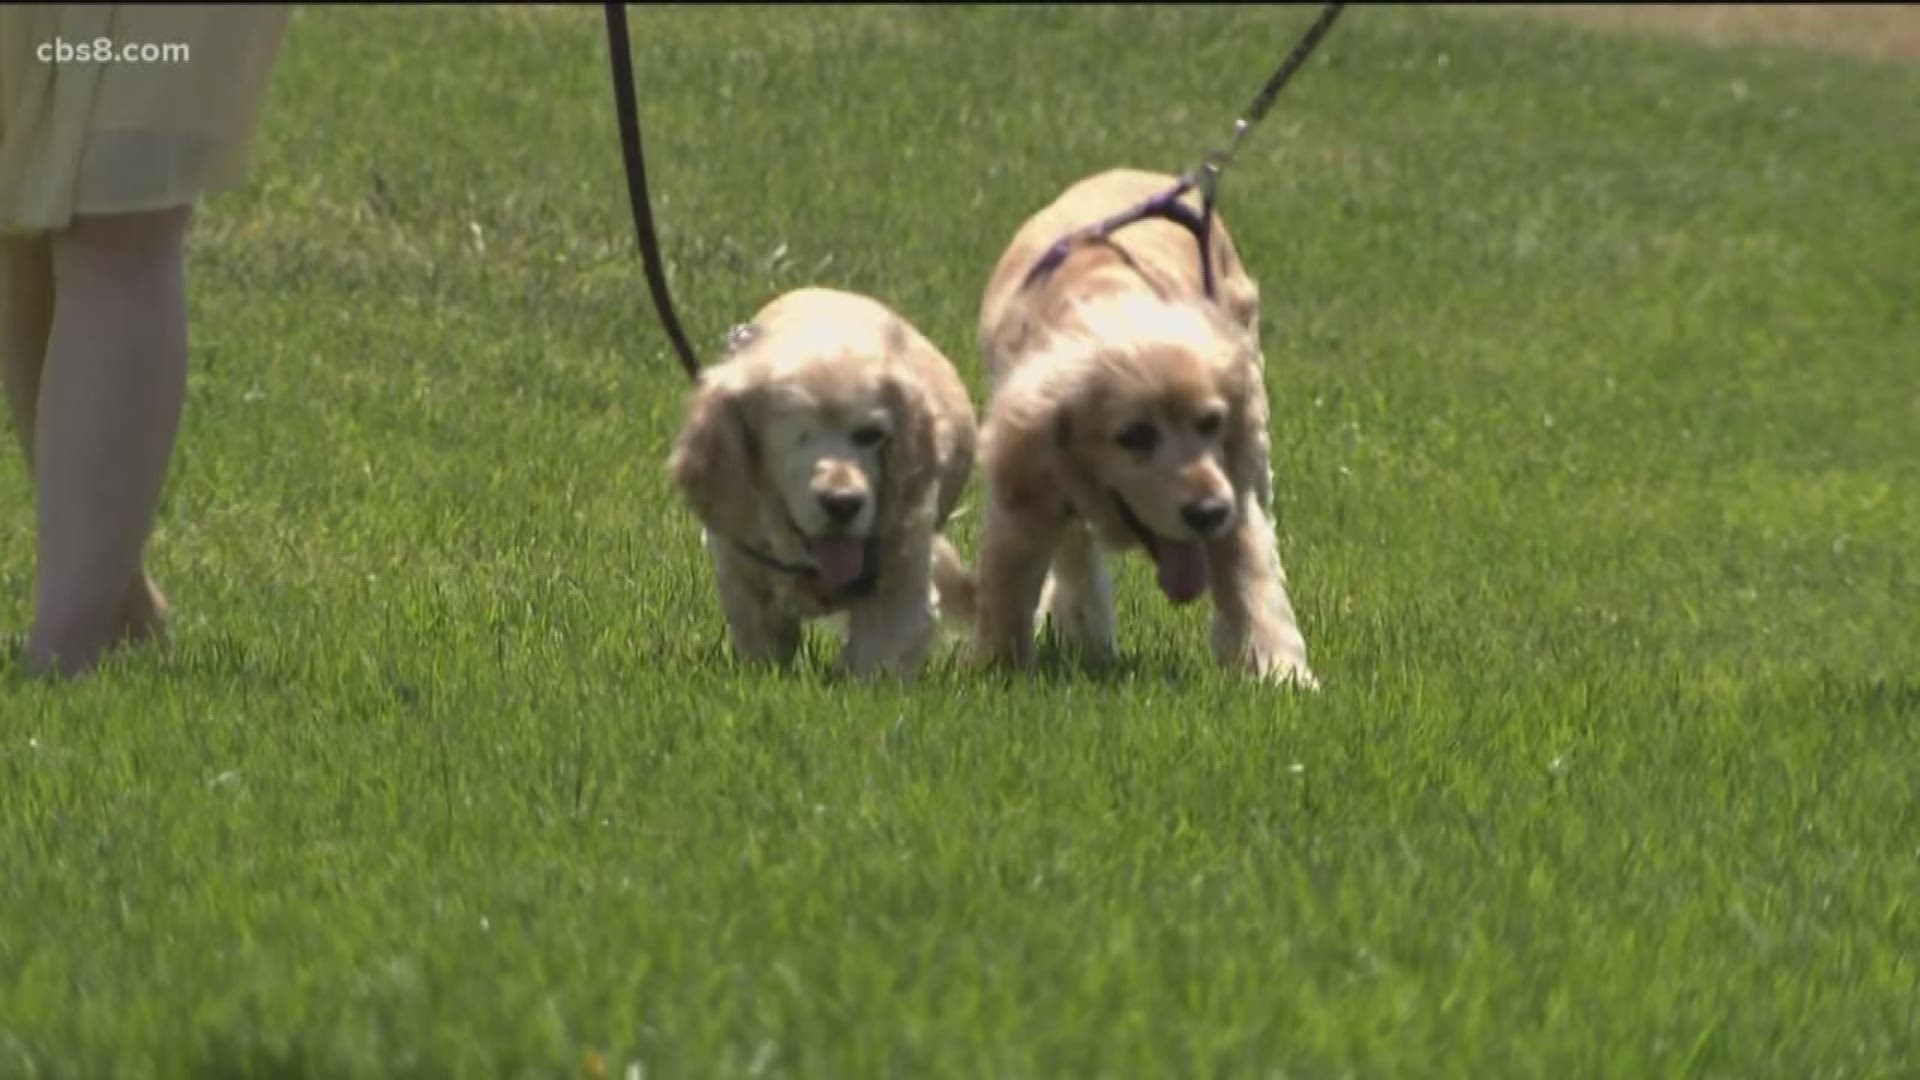 An important reminder for dog owners Monday as hot weather means hot pavements. As temperatures continue to rise, so do the changes of your dog's paw pads burning on pavement. News 8's Shawn Styles has some tips on how you can ensure your pooches are protected.